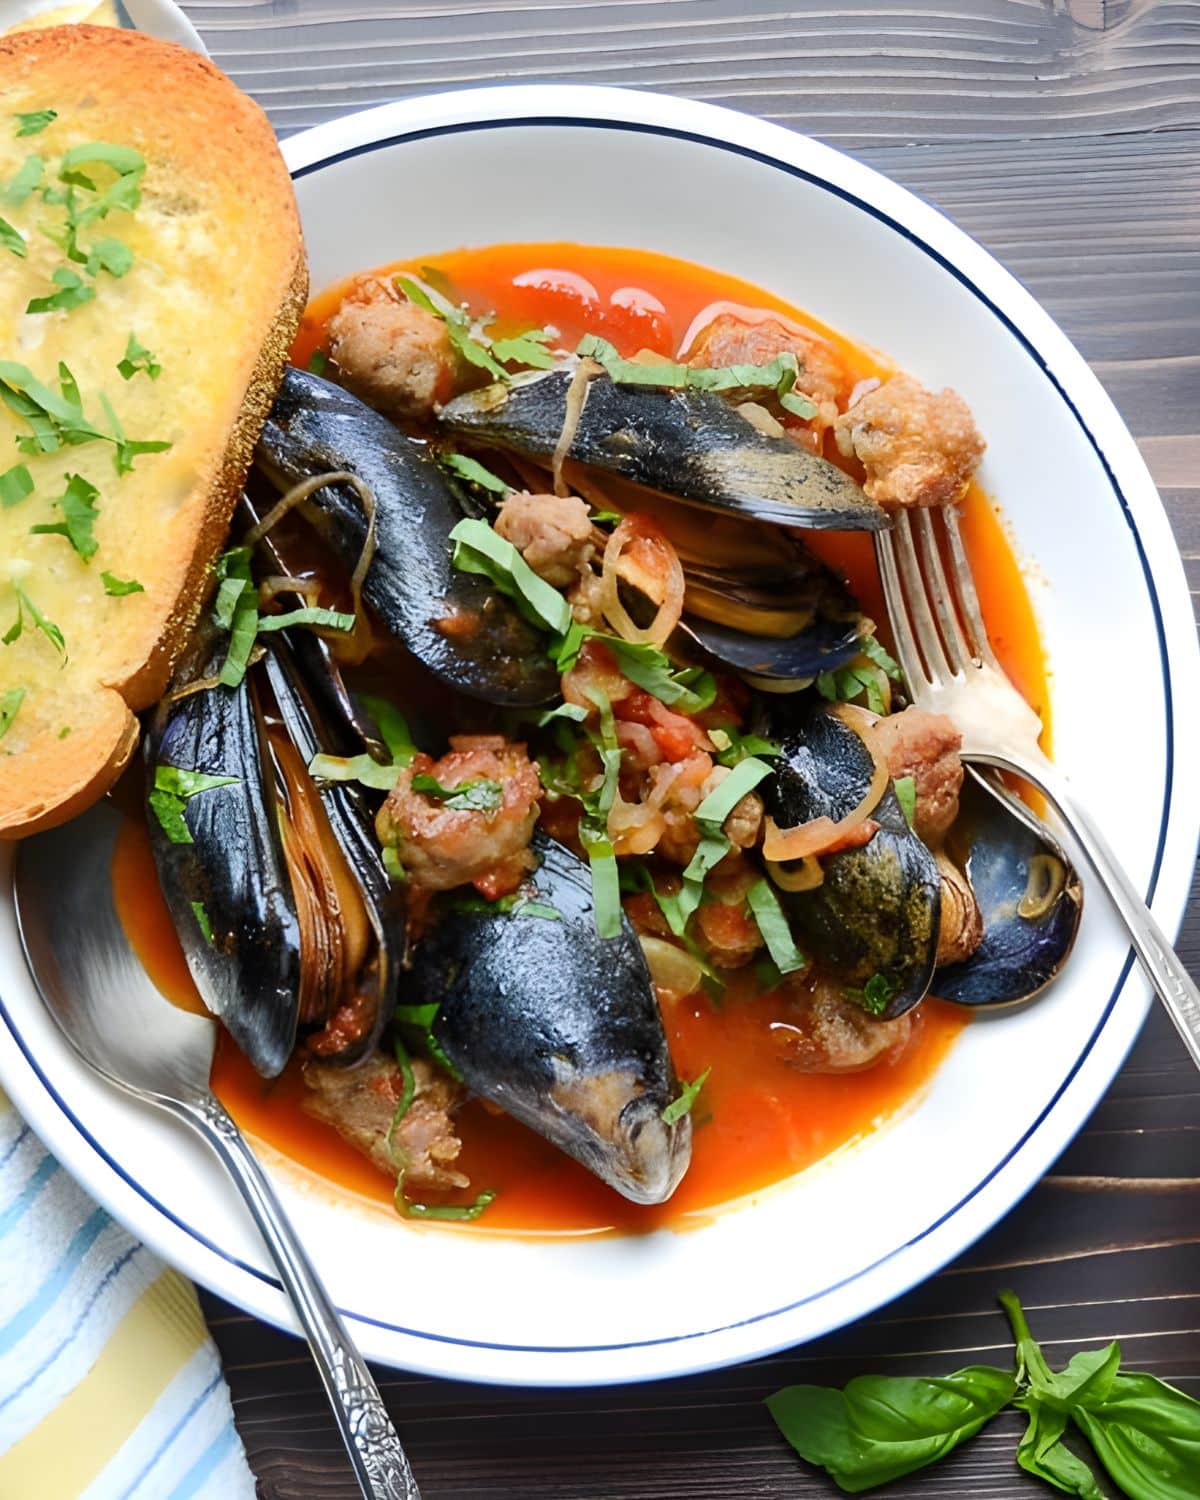 A bowl of mussels and sausage.